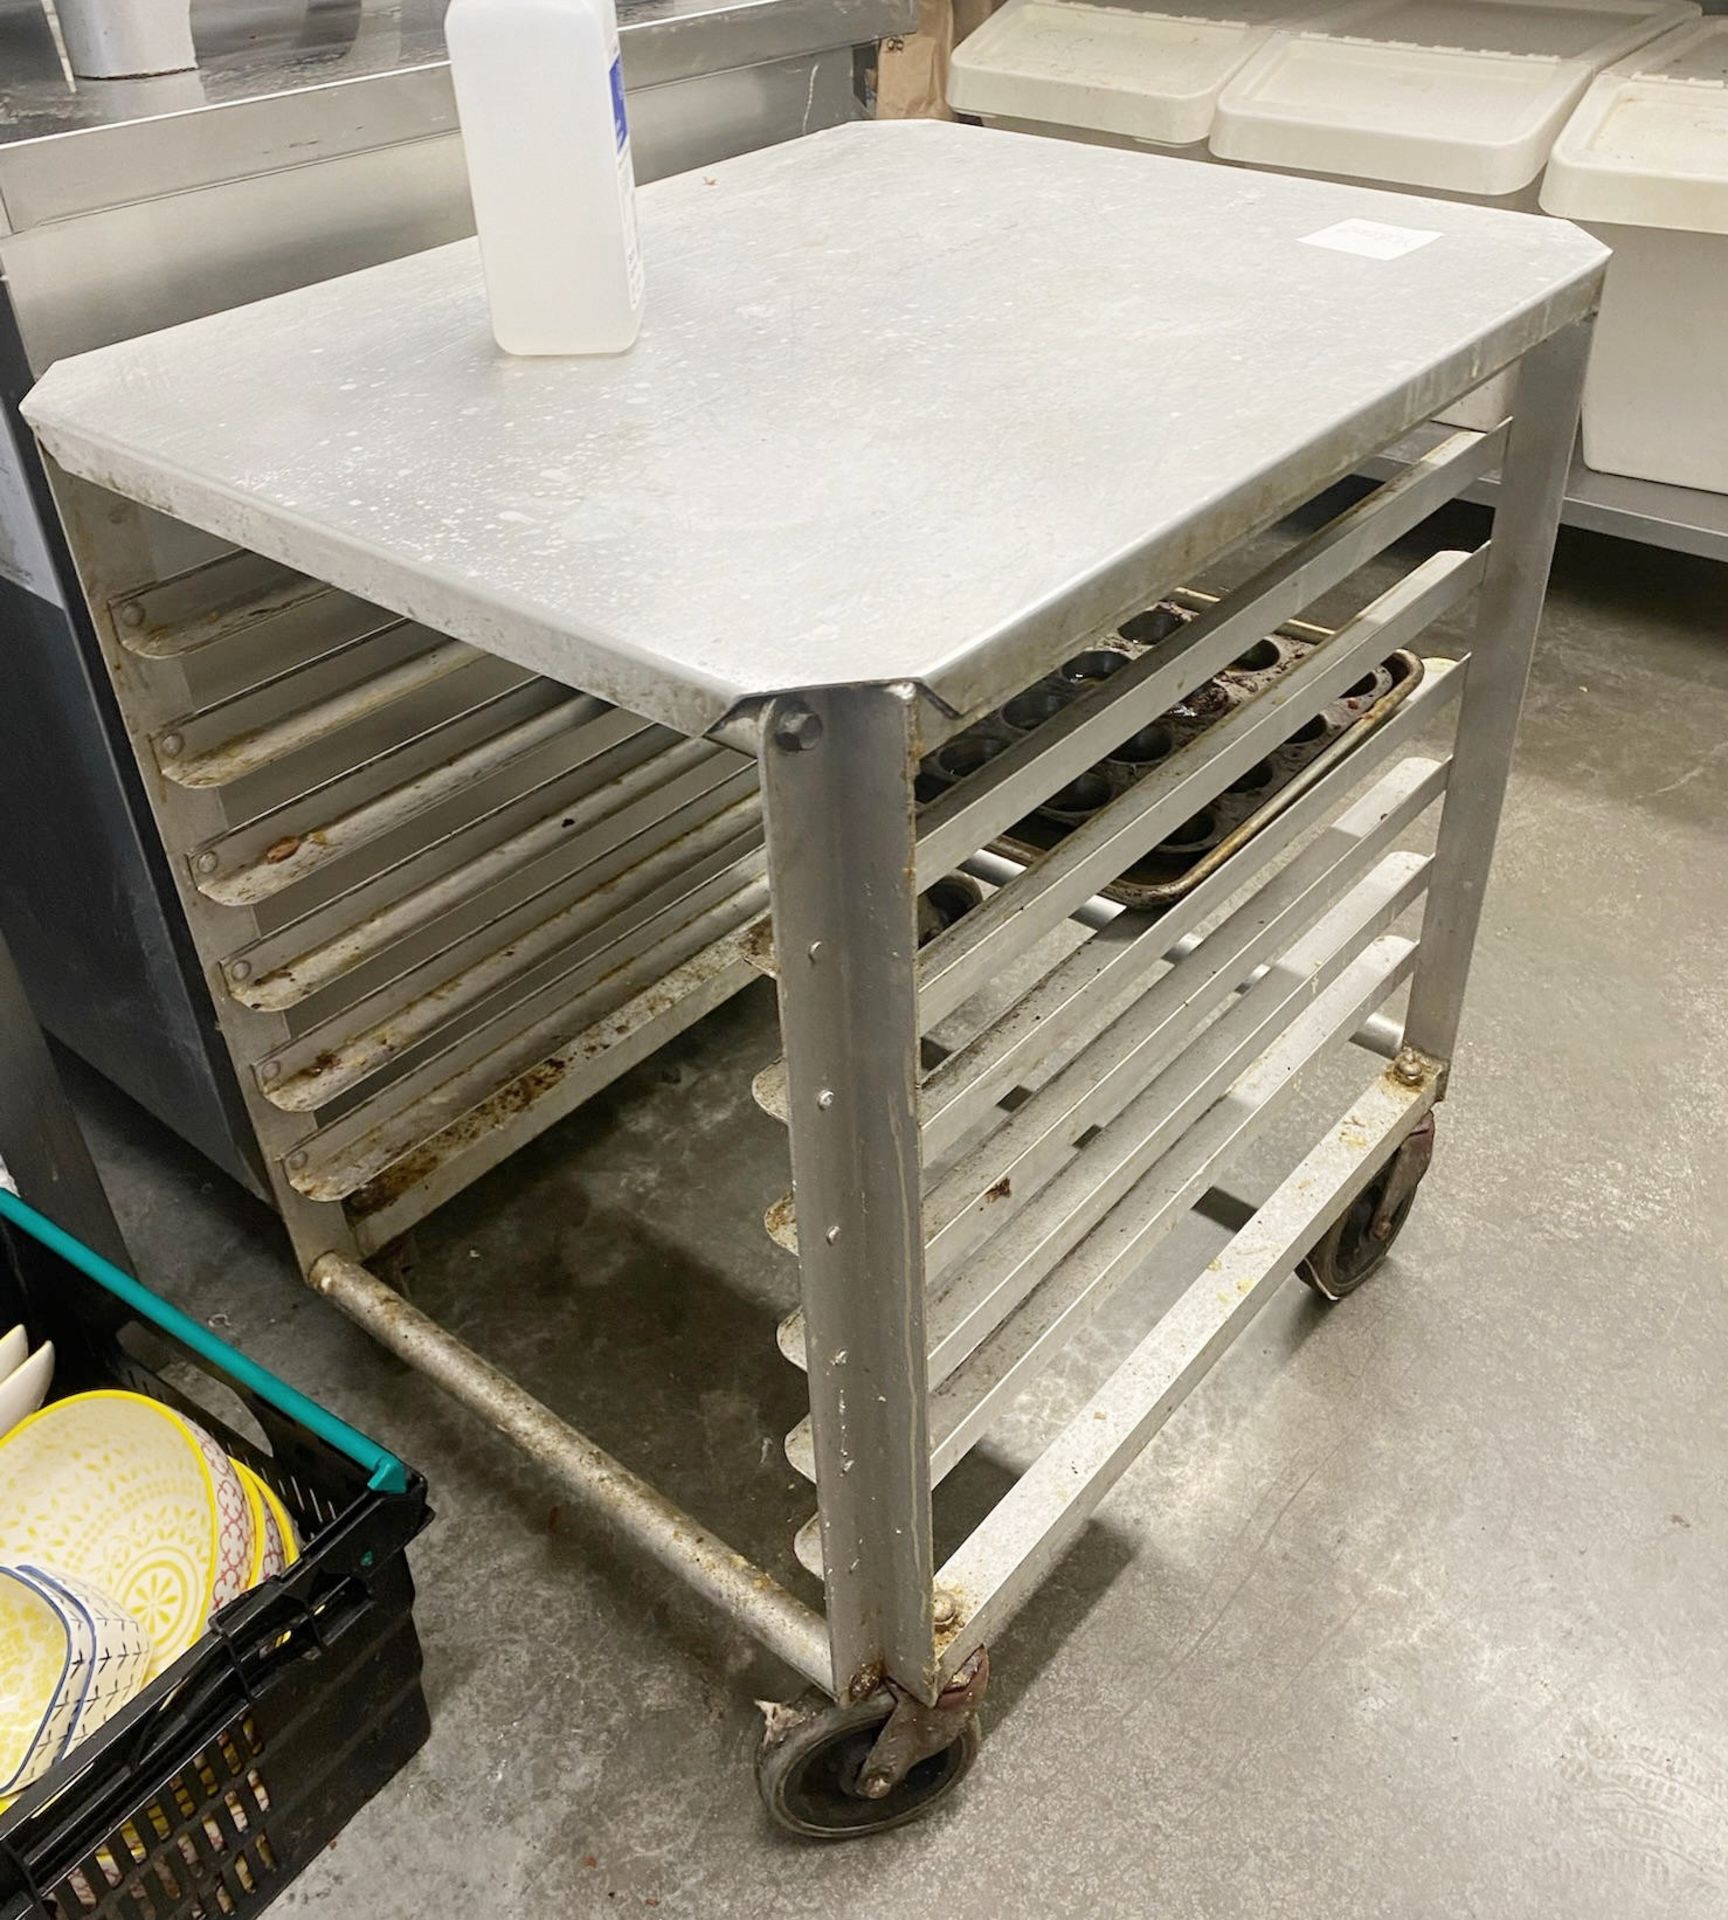 1 x Rockwood 6 Tier Trolley For Baking Trays - Stainless Steel Finish